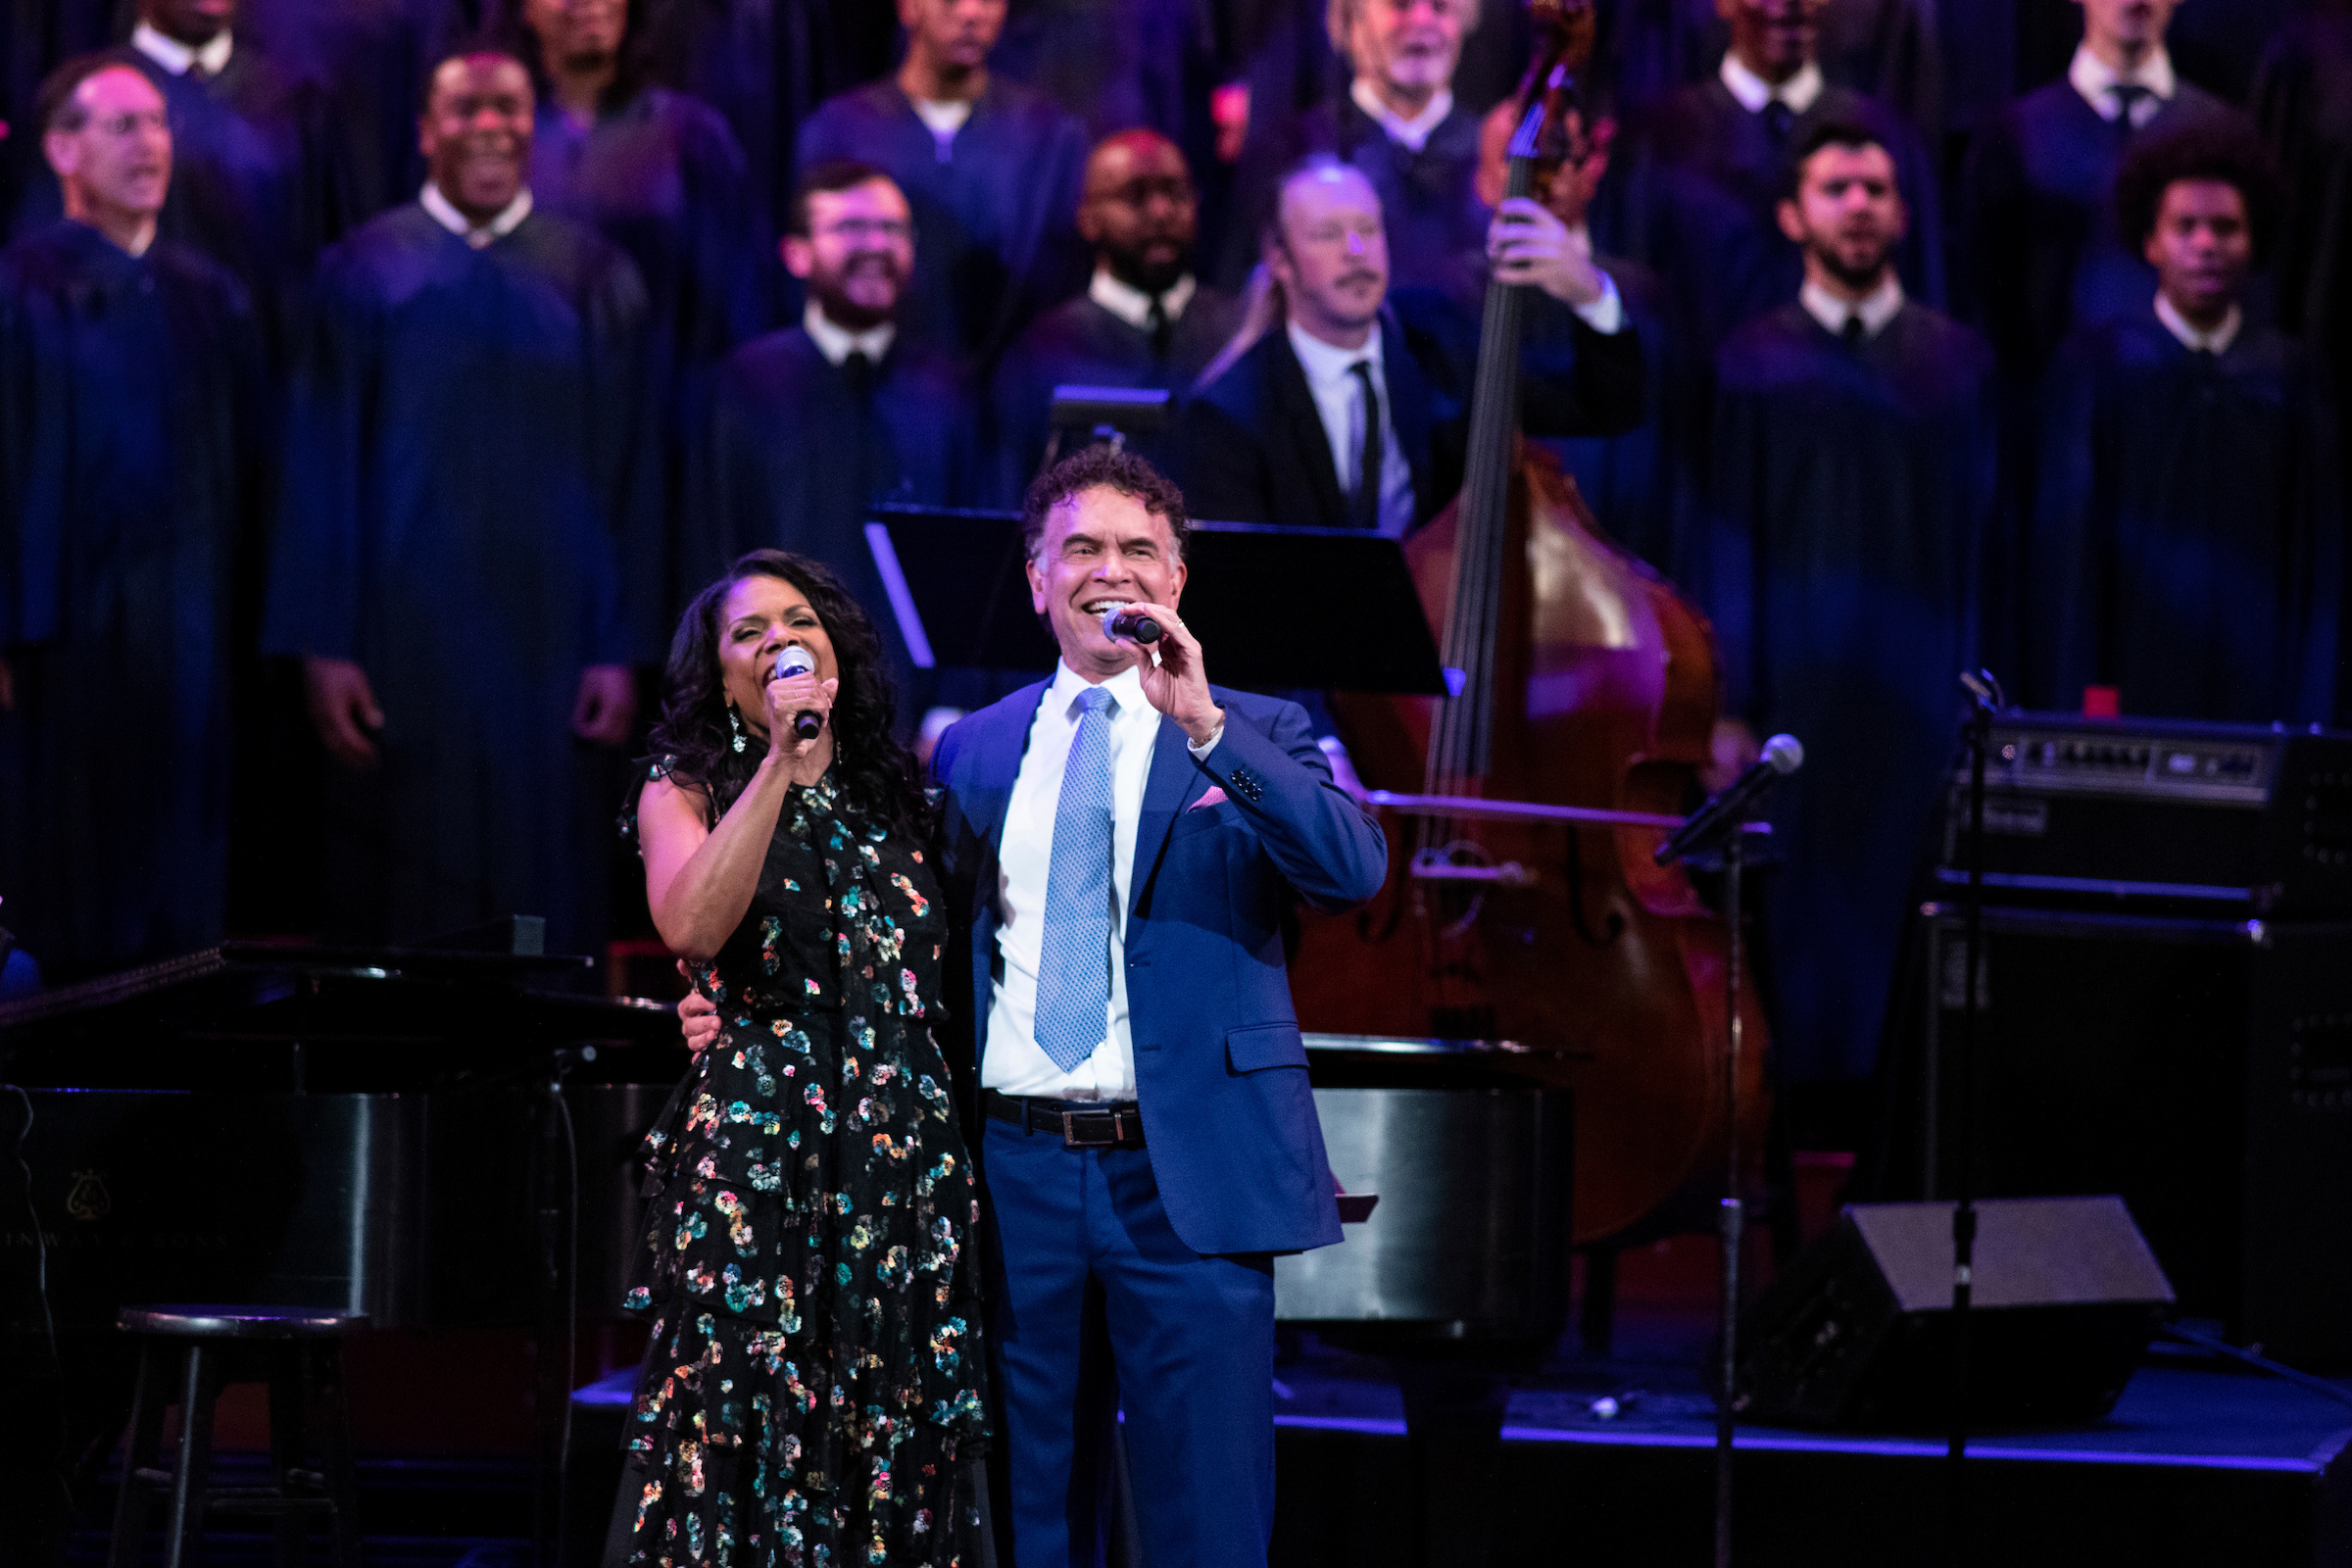 Audra McDonald and Brian Stokes Mitchell wrap their arms around each other while singing into mics out to an audience